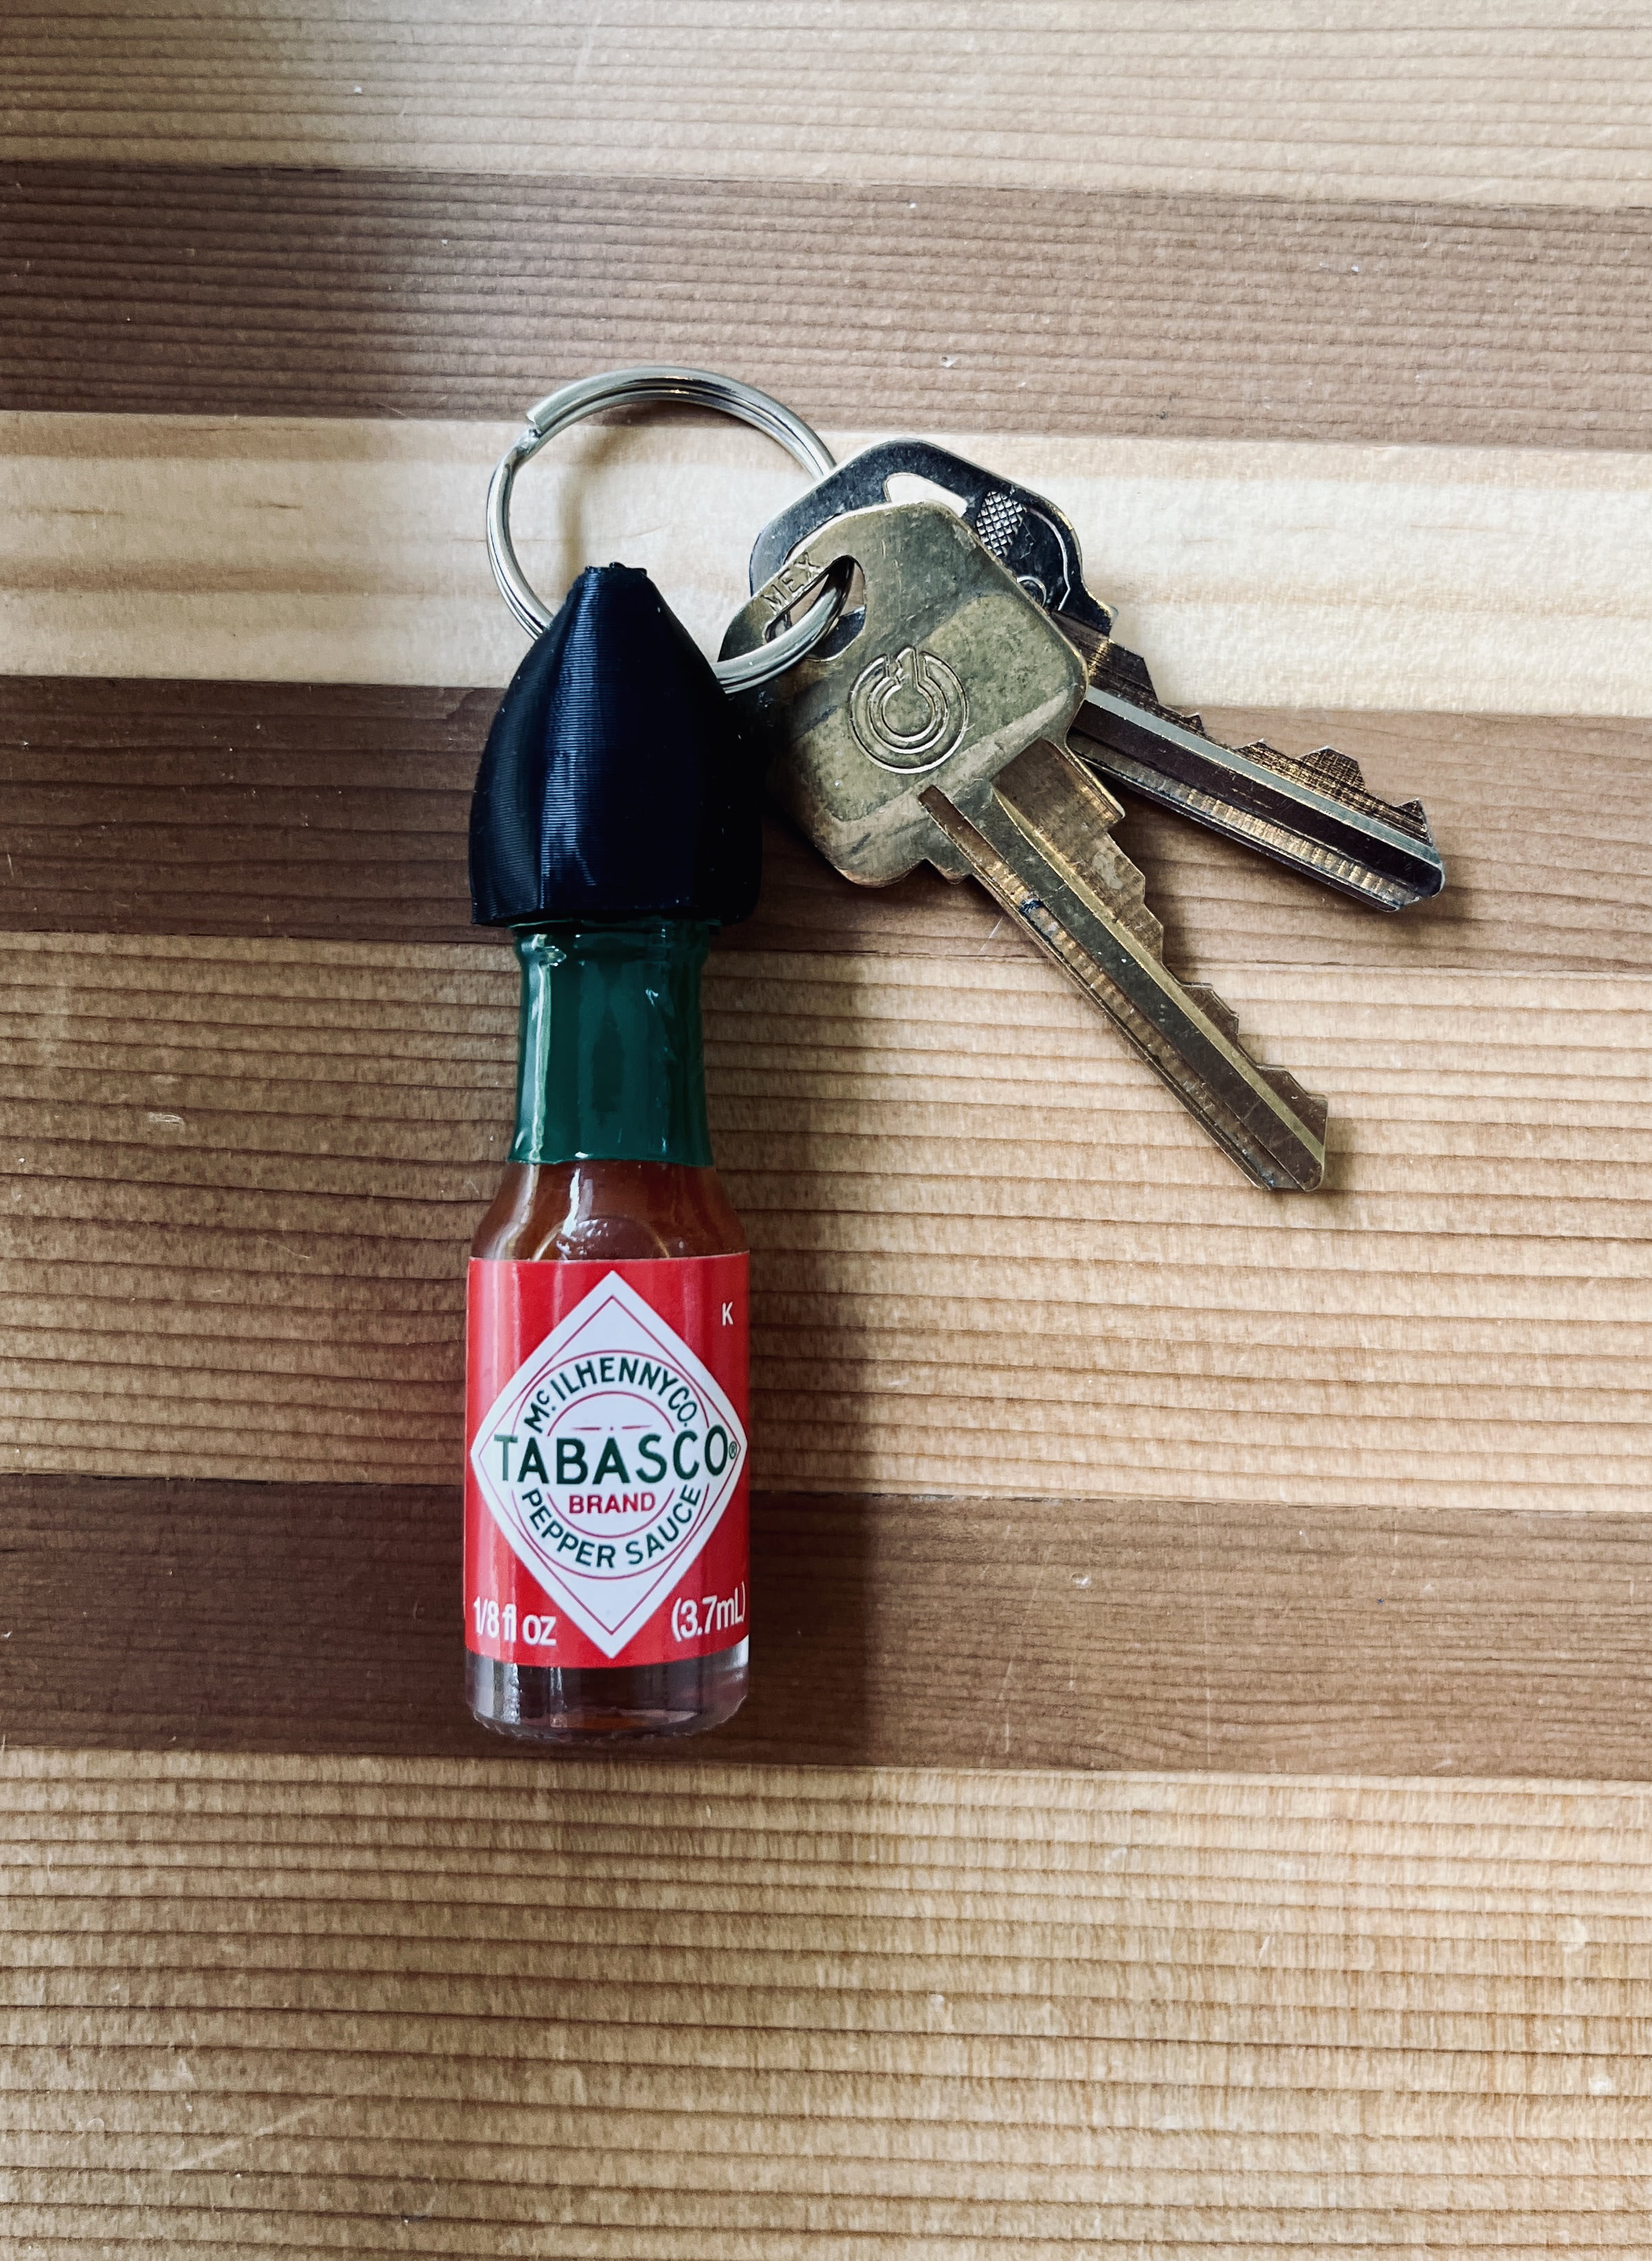  Mini Tabasco Hot Sauce Keychain - Includes 3 Mini Hot Sauce  Bottles (.35oz) With Travel Hot Sauce Key Chain and Refillable Funnel - Red Tabasco  Hot Sauce, Green Sauce and